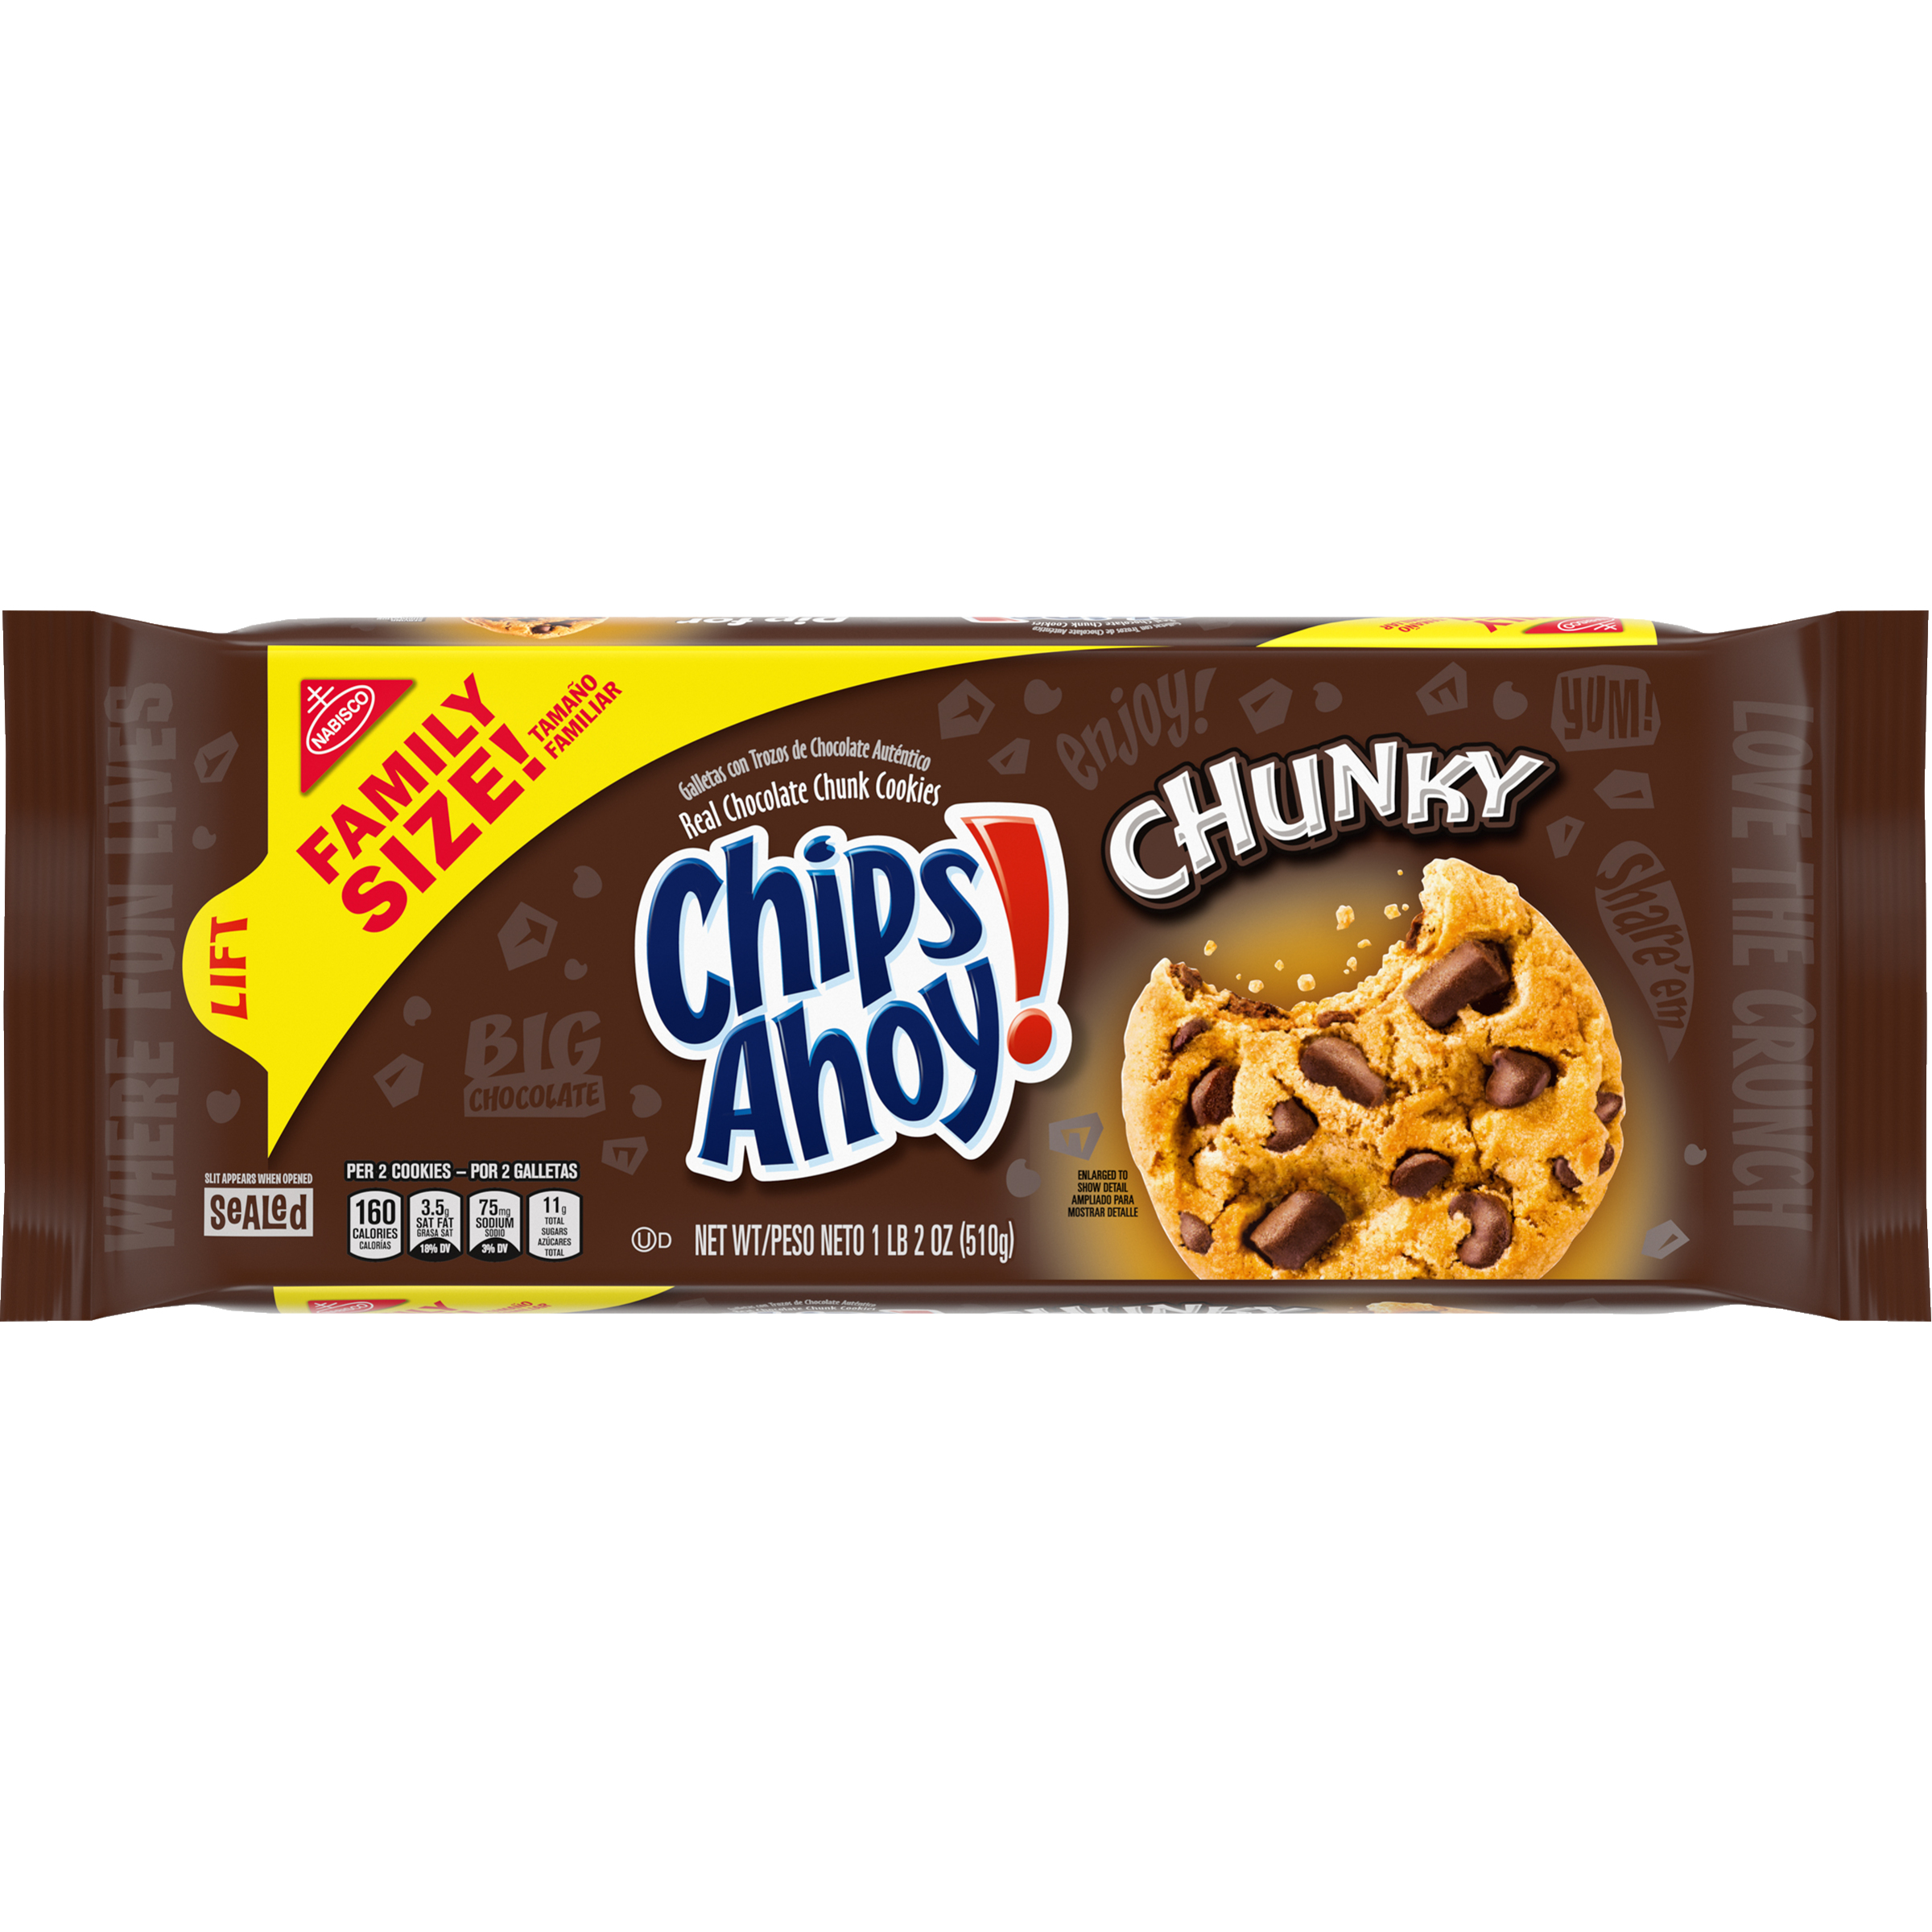 CHIPS AHOY! Chunky Chocolate Chip Cookies, Family Size, 18 oz-1